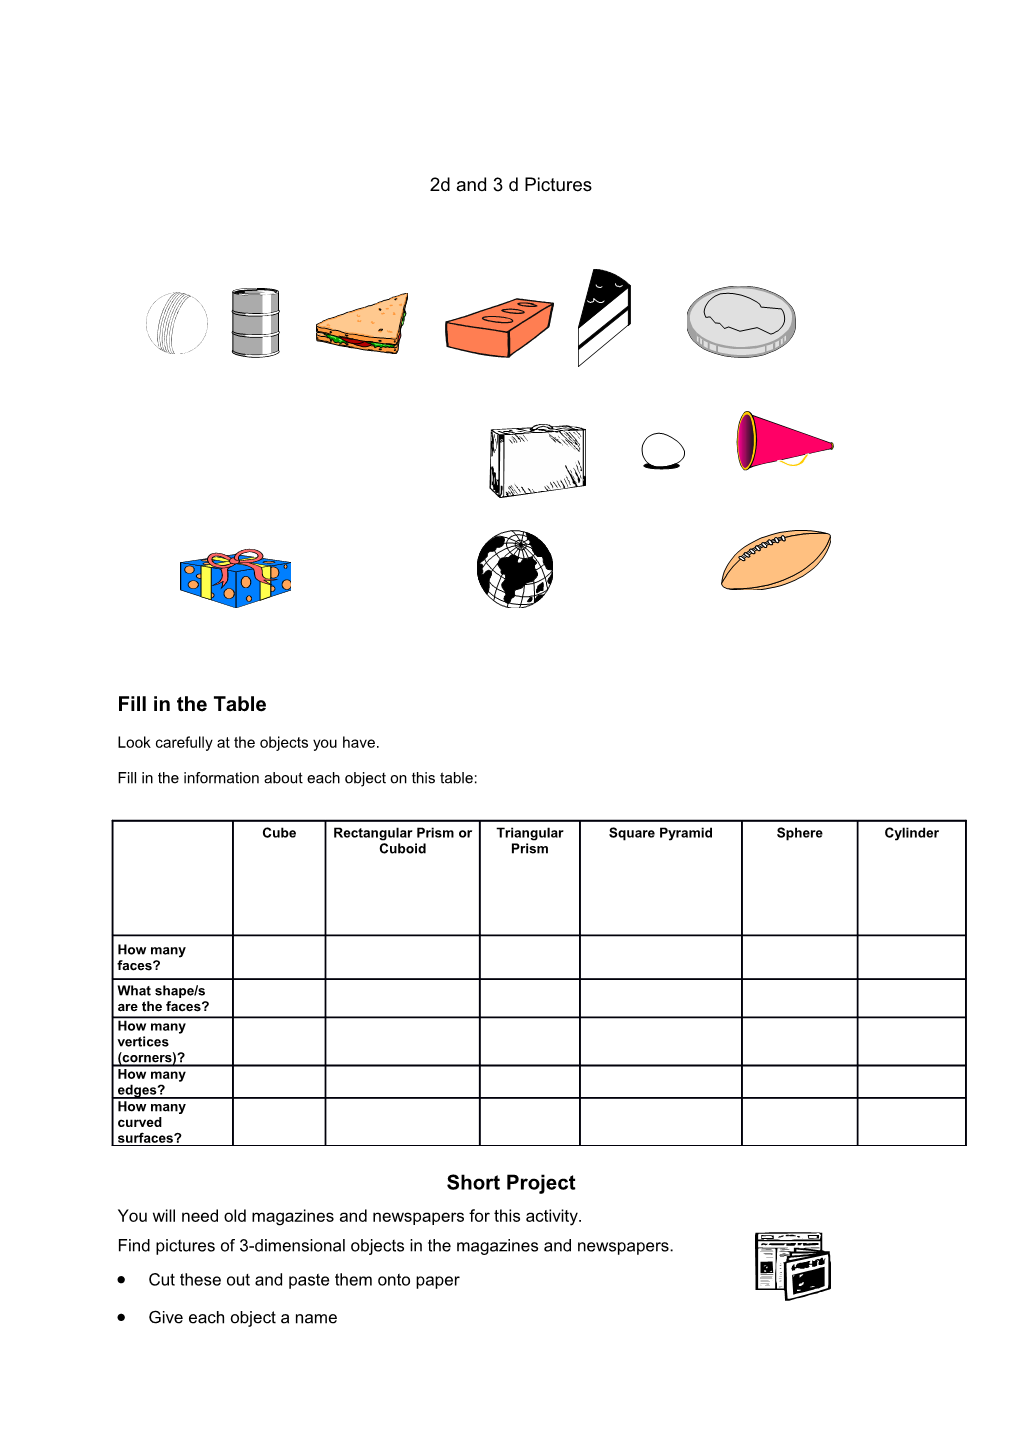 Fill in the Information About Each Object on This Table